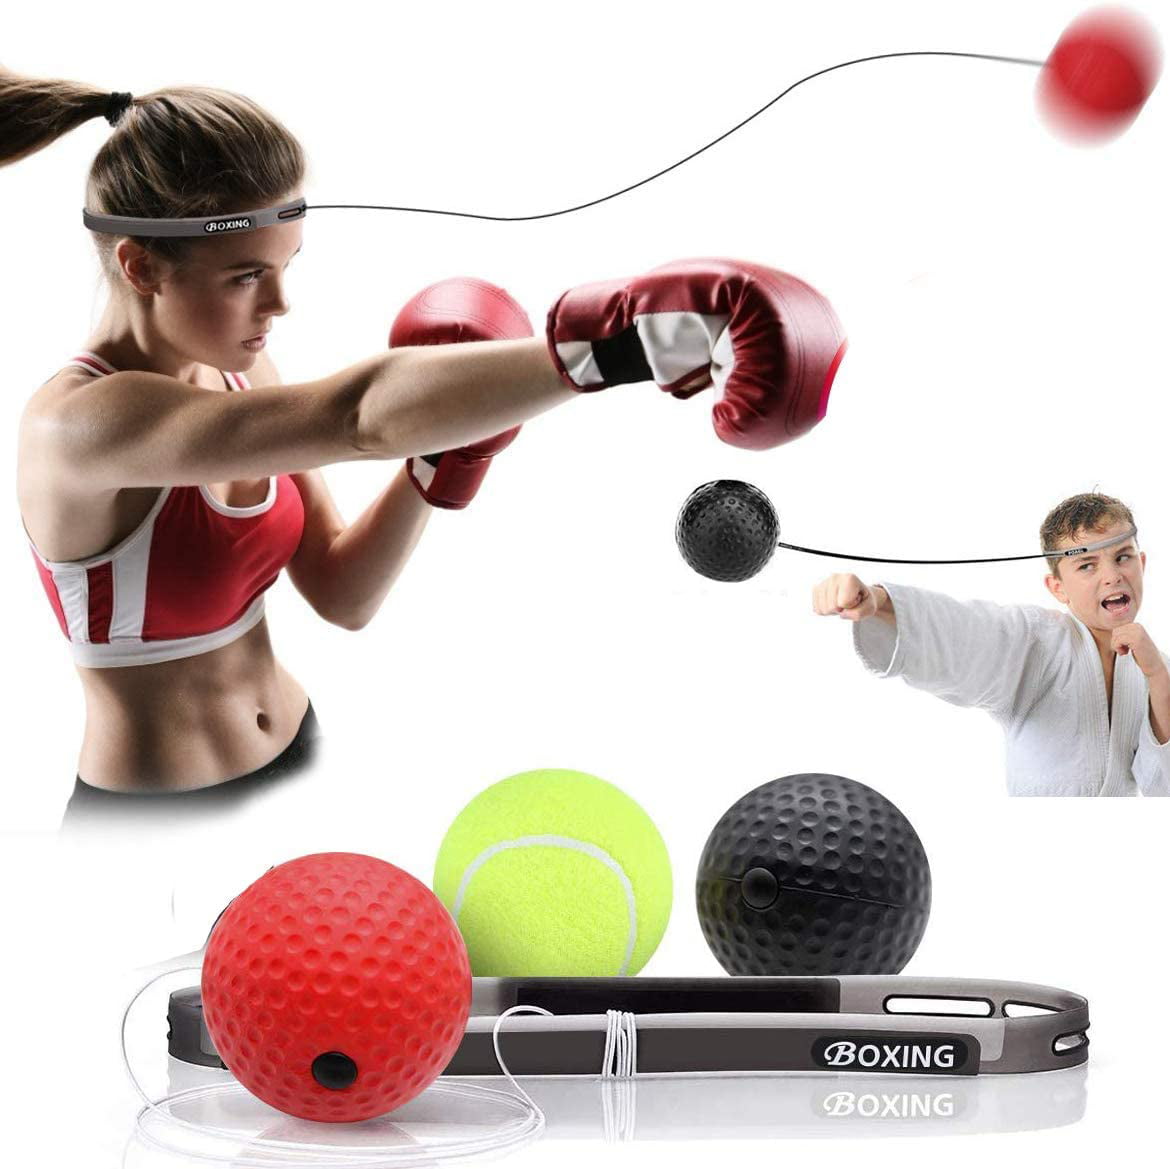 Focus and Hand Eye Coordination Training for Boxing Great for Reflex 3 Difficulty Levels Boxing Fight Ball Mma Speed Training Suitable for Adult/Kids Boxing Reflex Ball Boxing Training Ball 